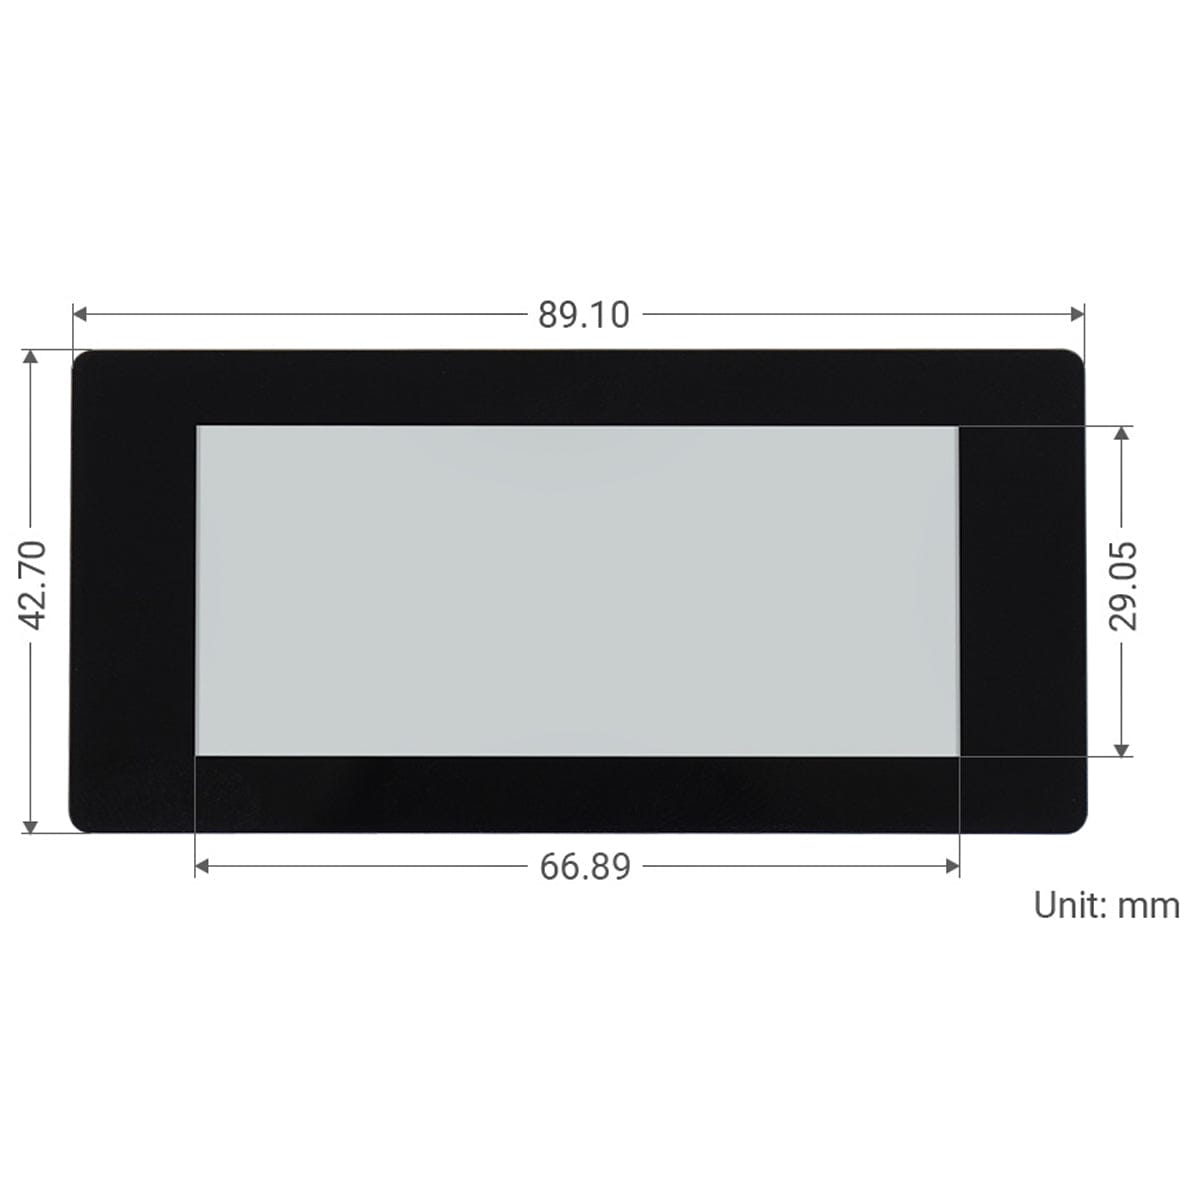 2.9" Touchscreen E-Paper Display HAT (296×128) - The Pi Hut